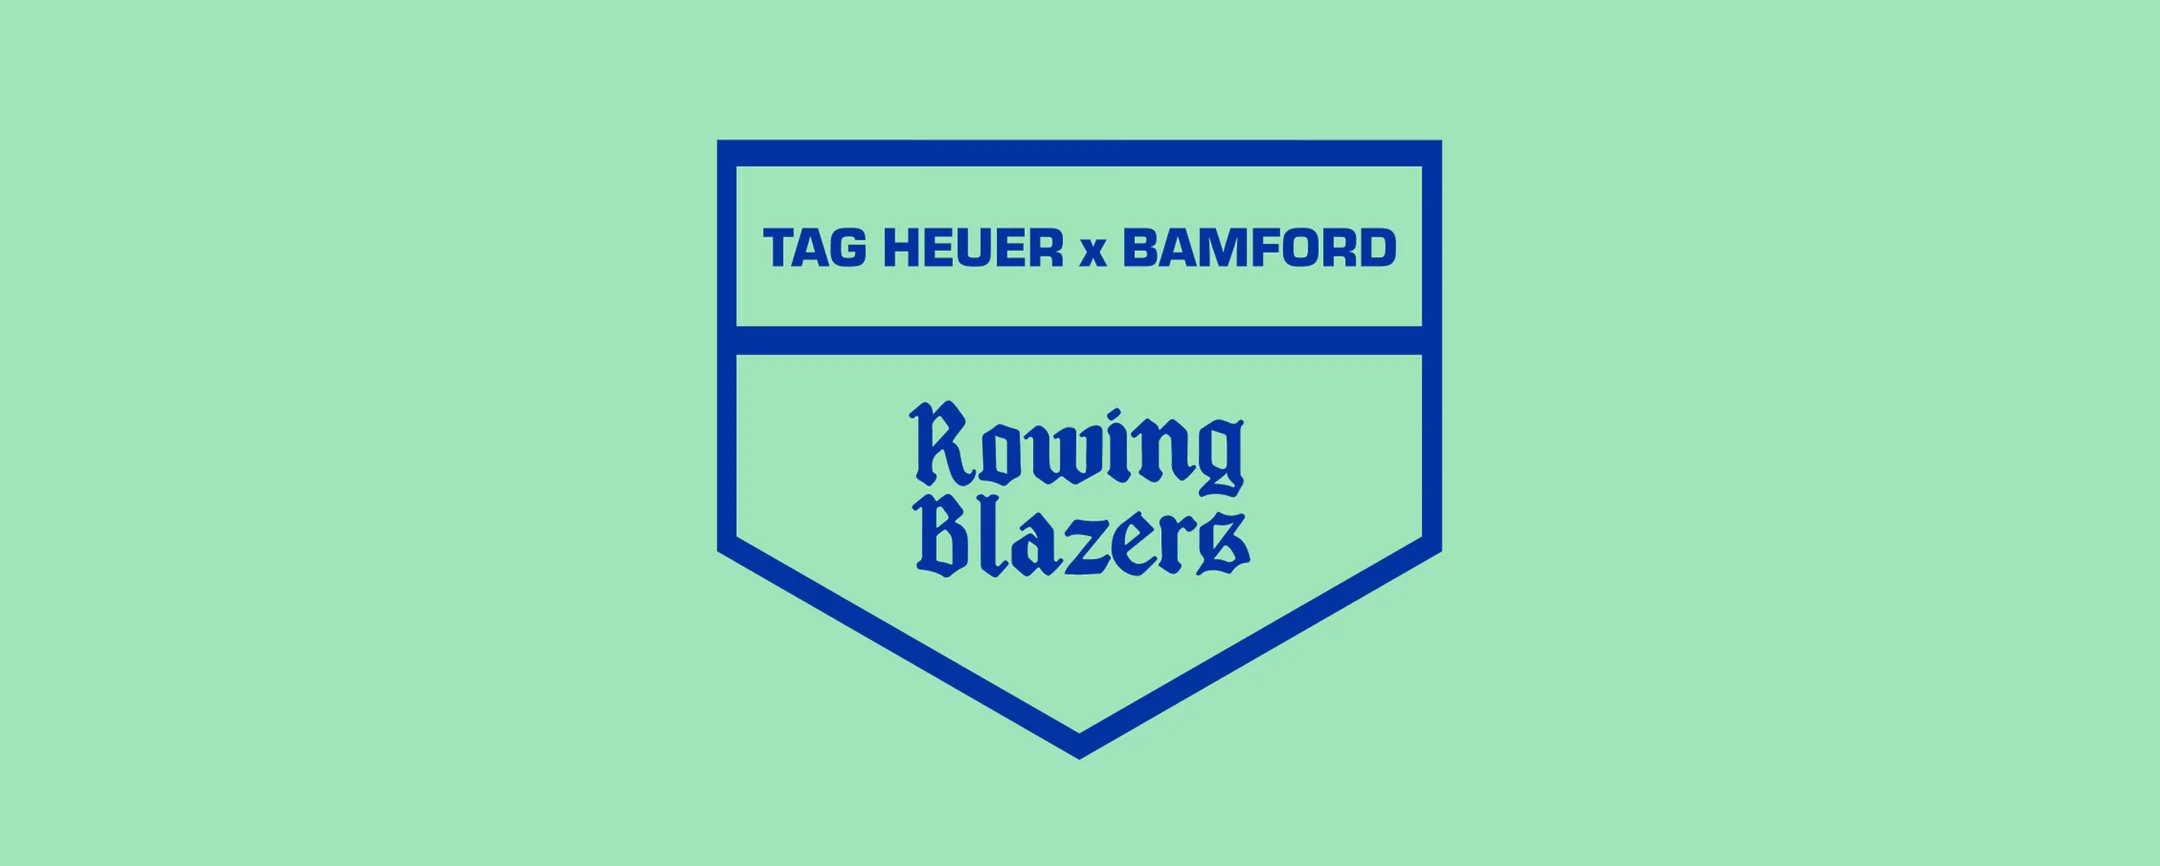 A teaser image of the Rowing Blazers x Bamford x Tag Heuer collaboration.